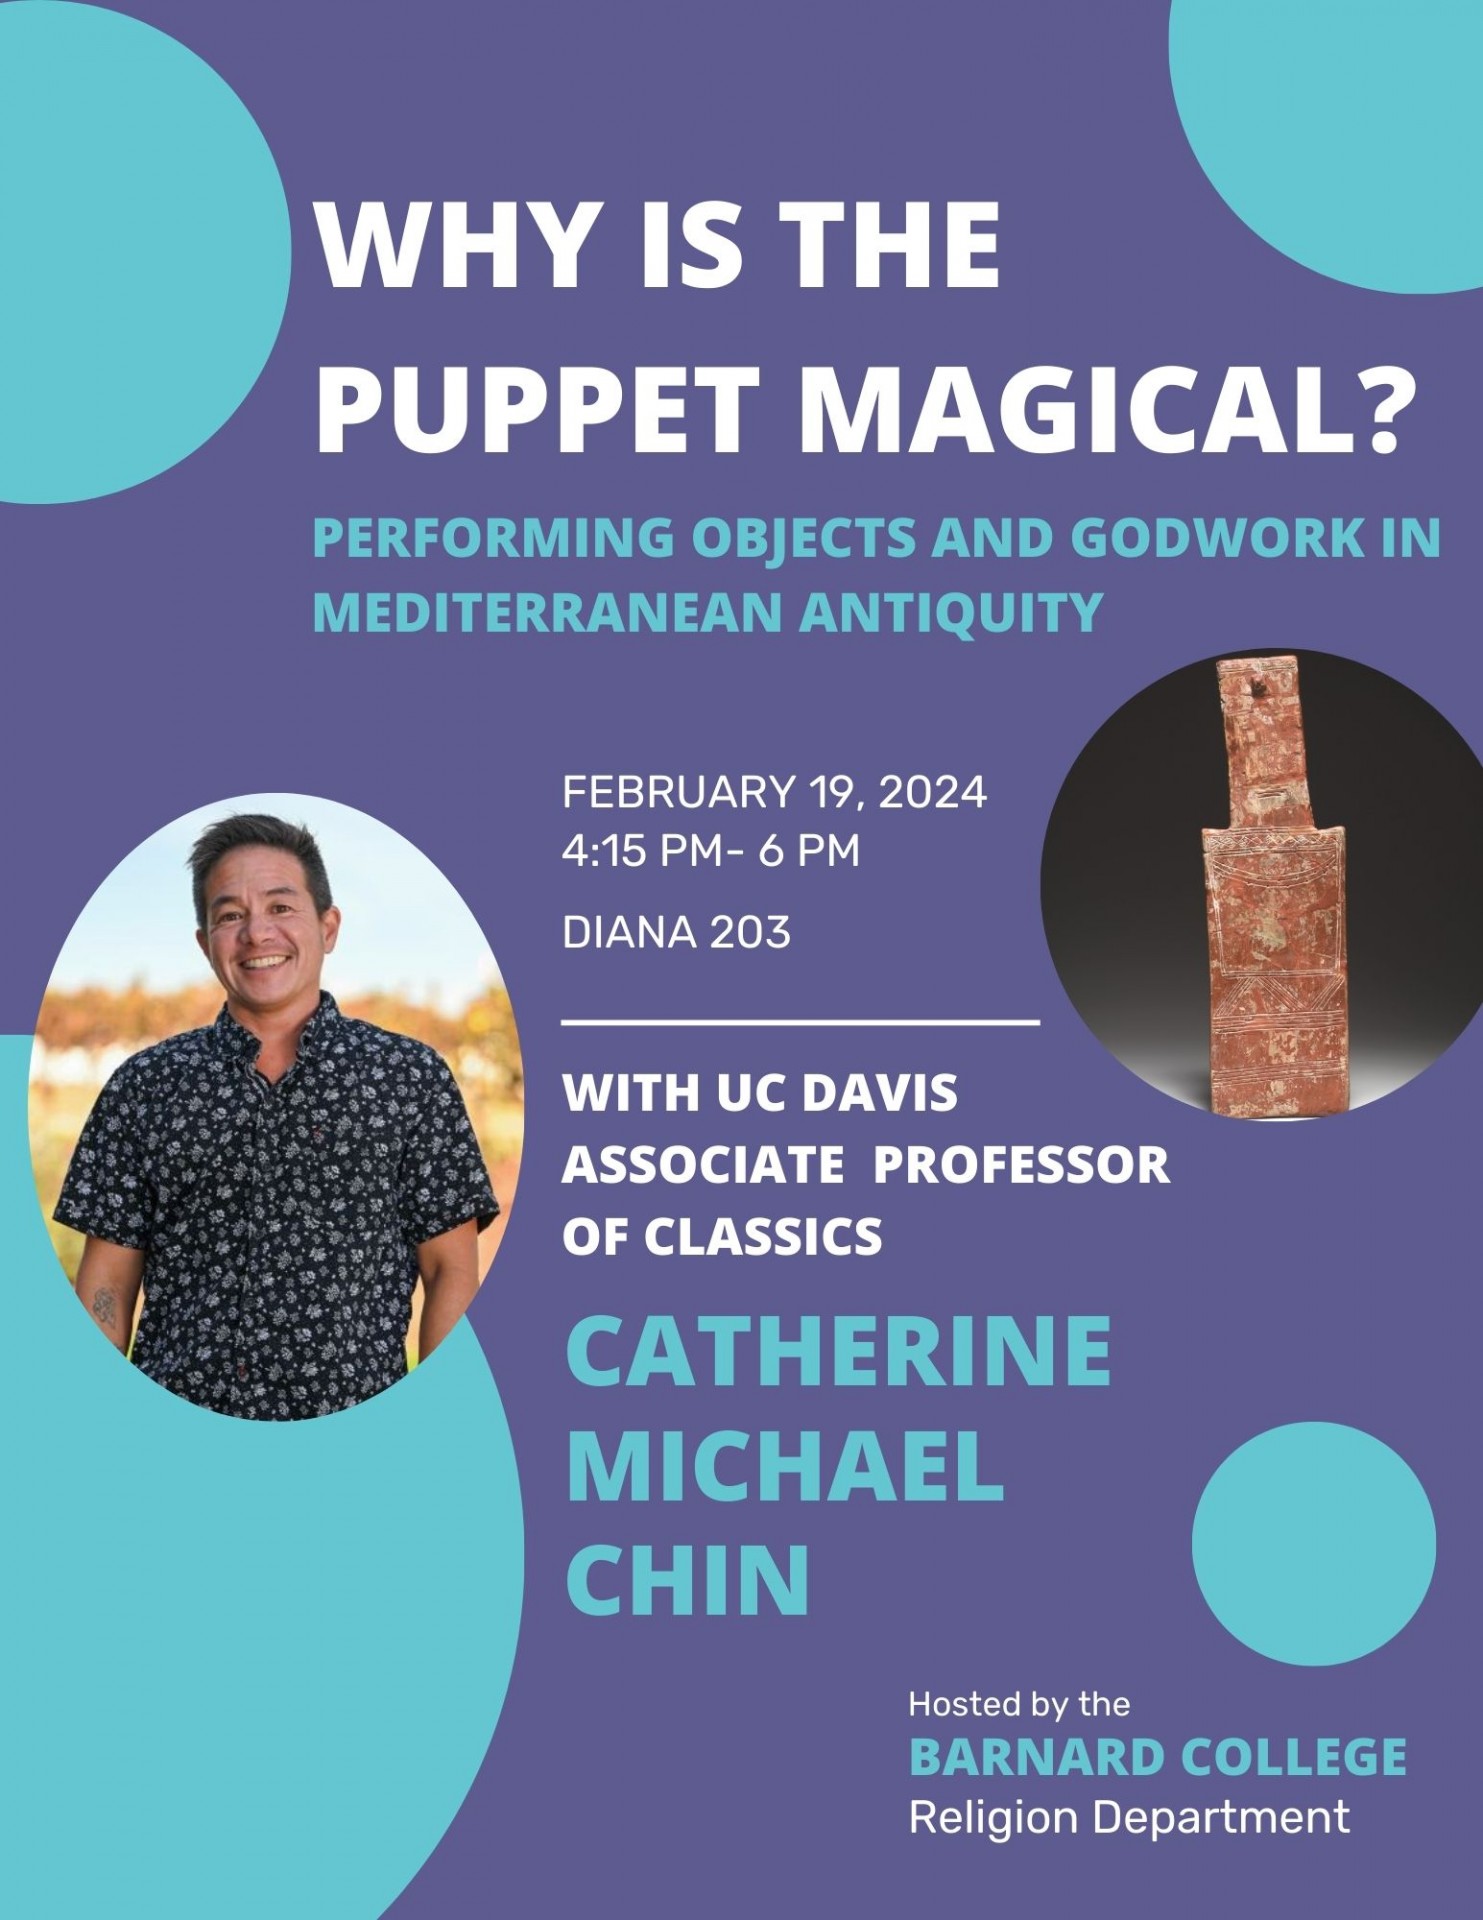 Why is the Puppet Magical? Performing Objects and Godwork in Mediterranean Antiquity